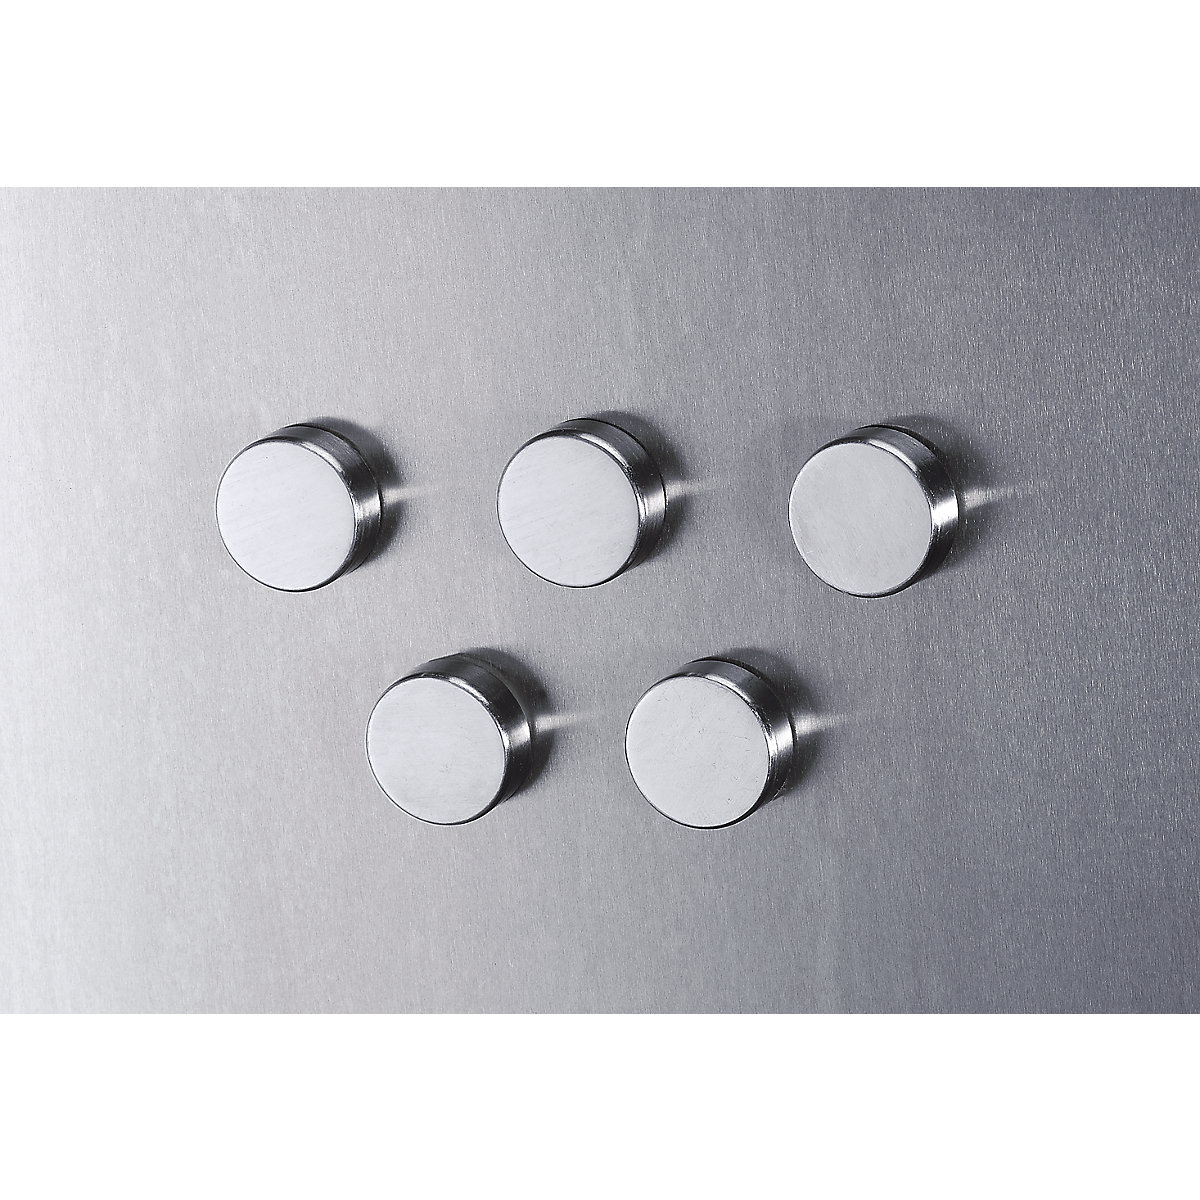 Stainless steel magnet